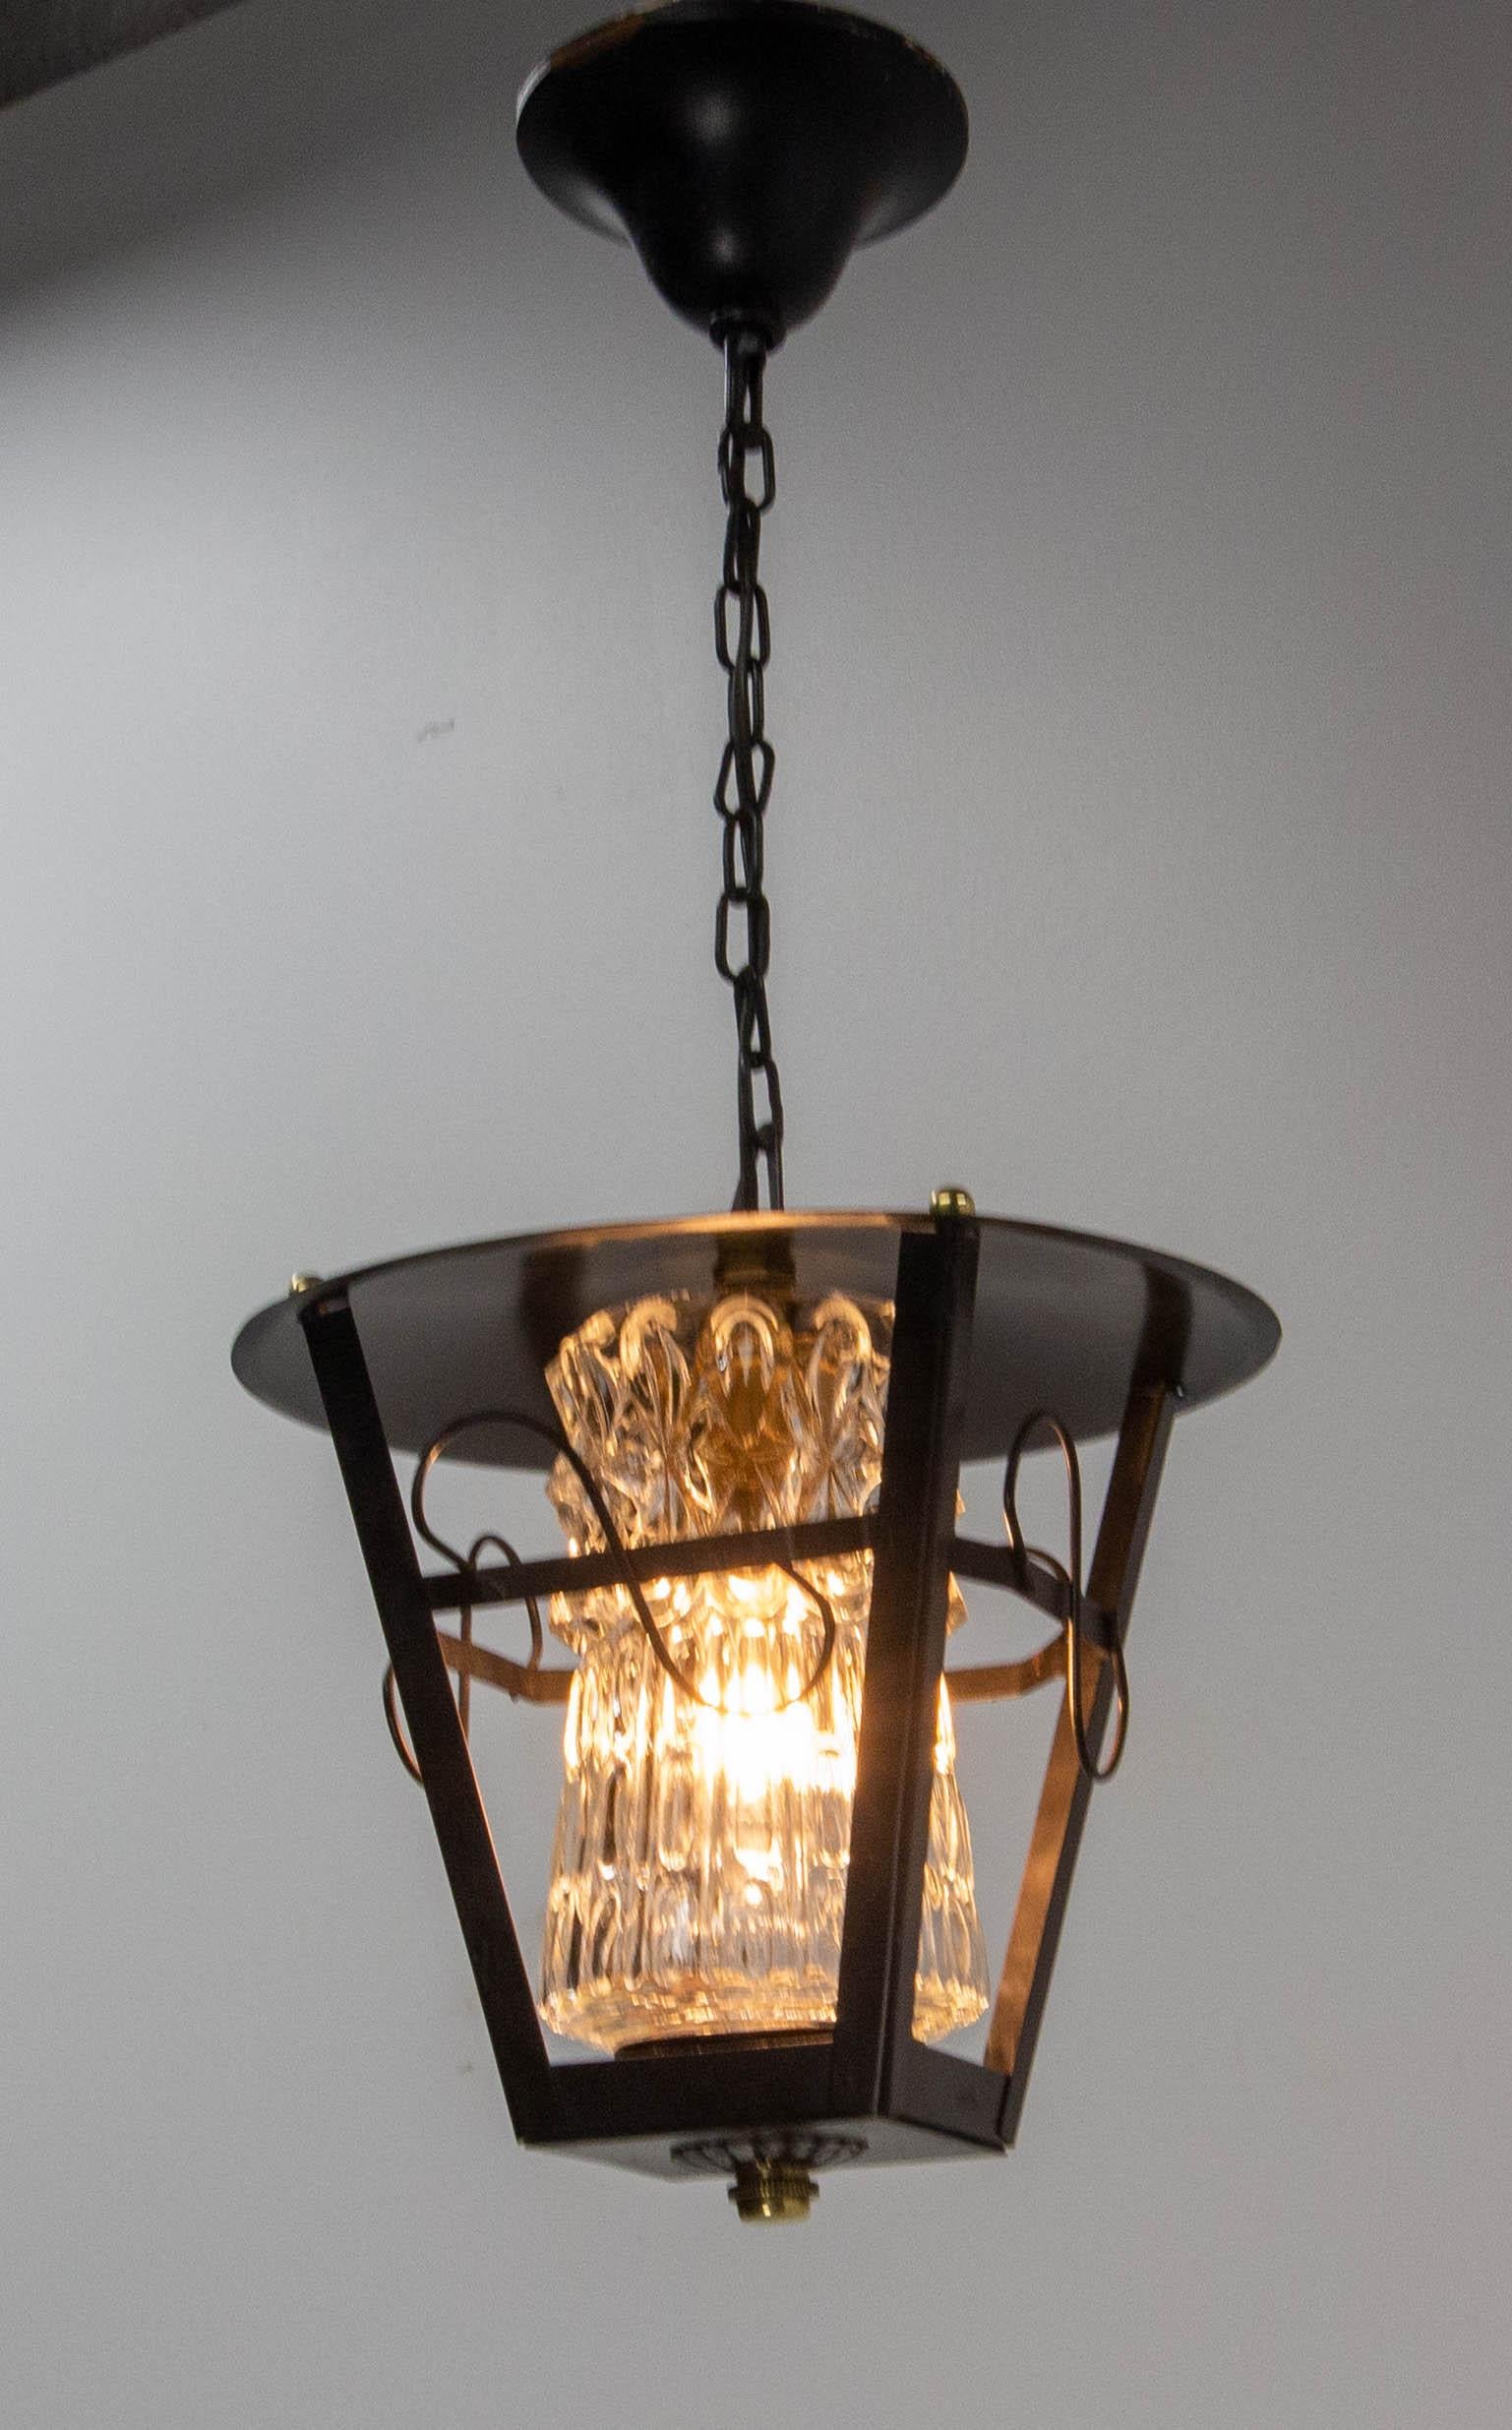 Mid-20th Century Iron and Glass Ceiling Lamp Lustre French Lantern, circa 1960 For Sale